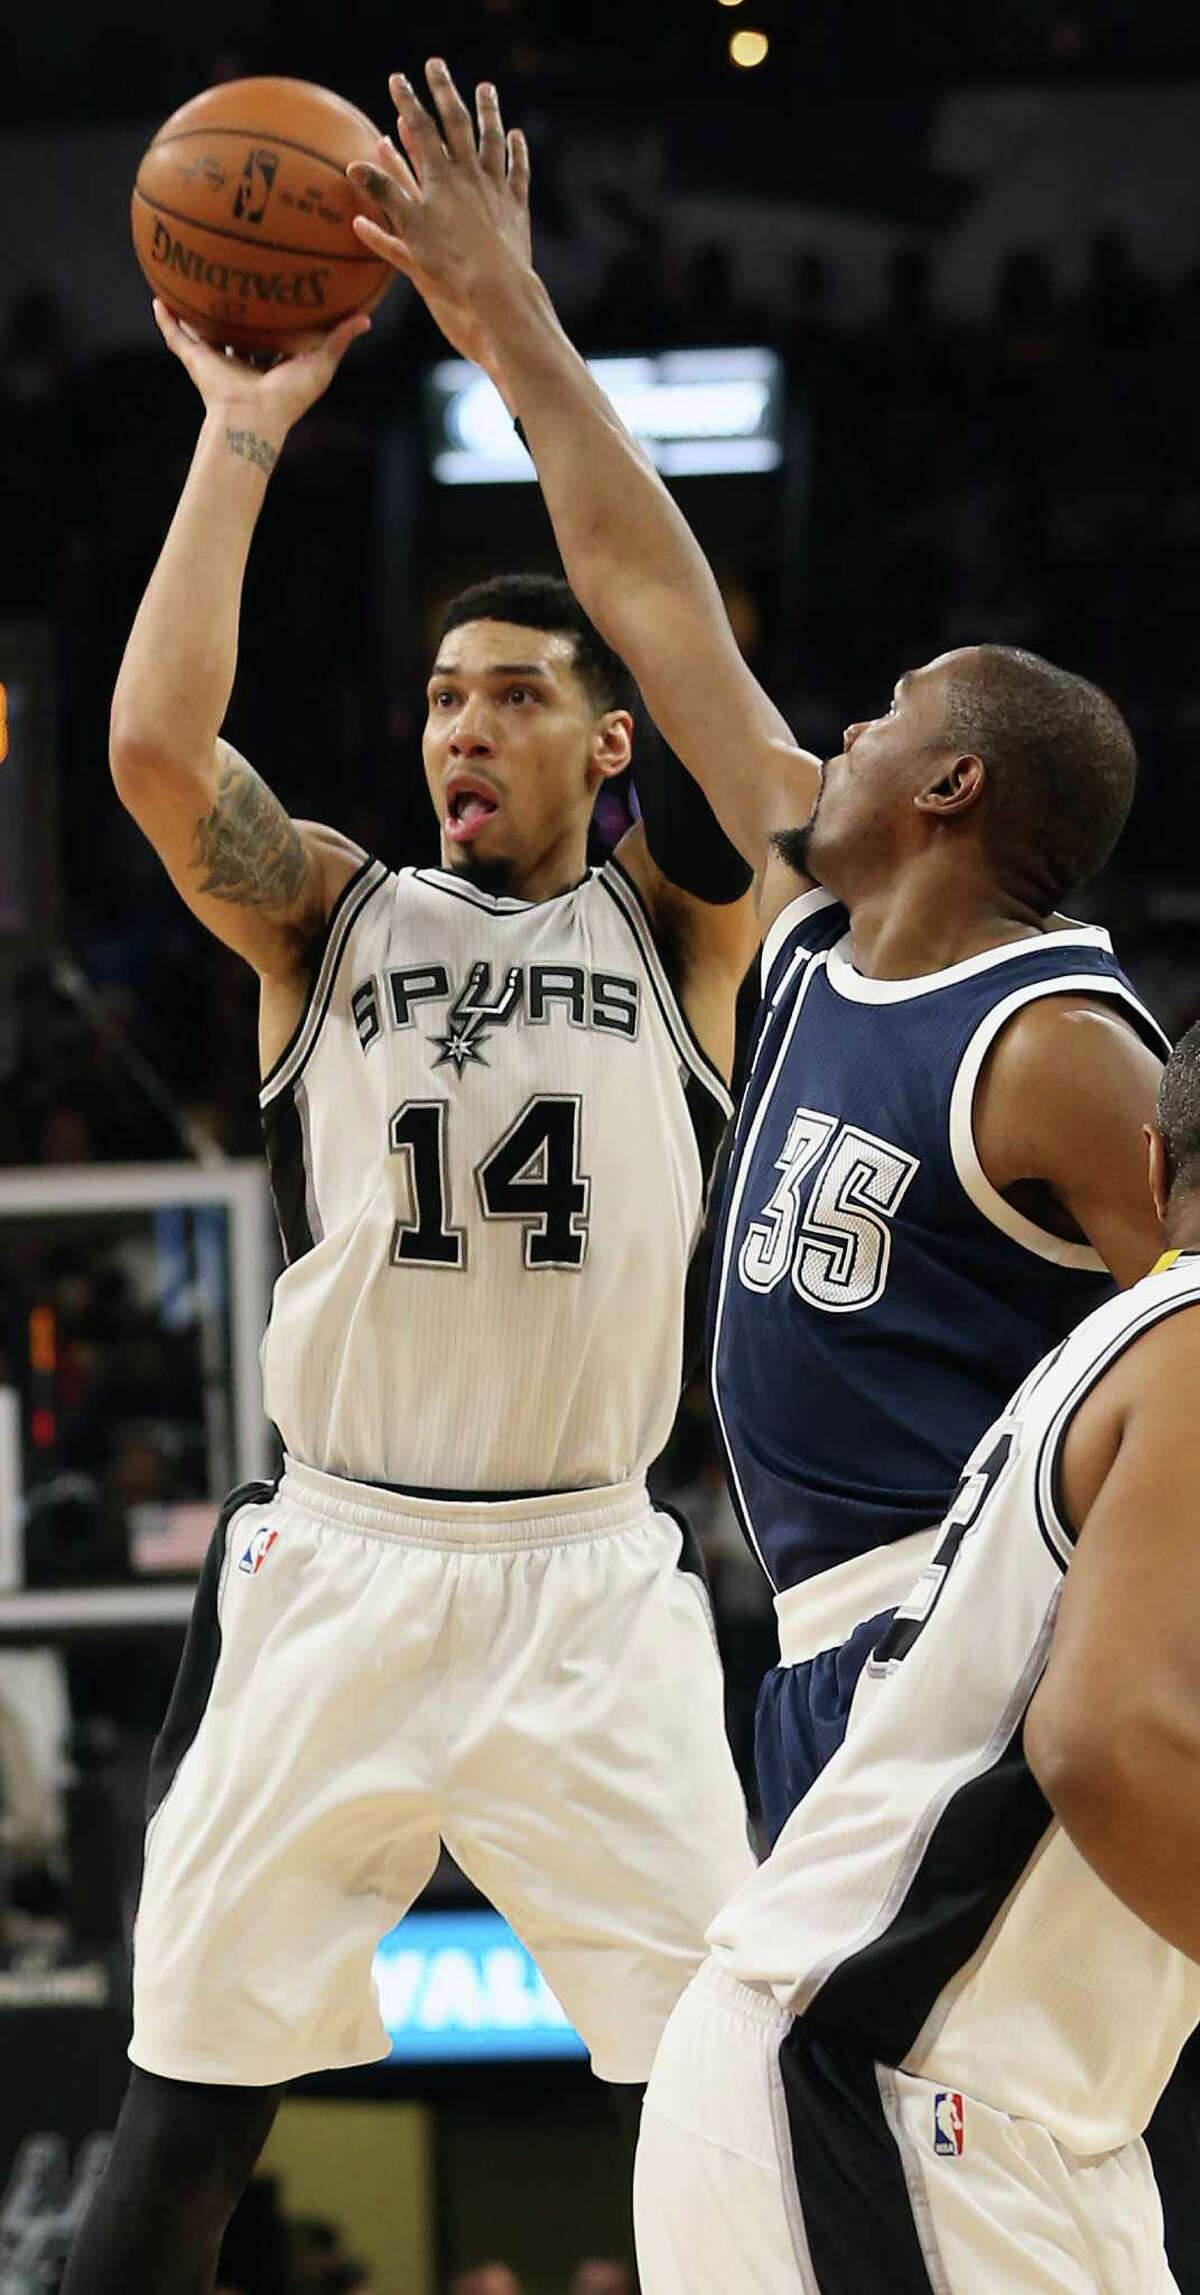 Danny Green pumps a three pointer and is fouled by Kevin Durant as the Spurs host the Thunder in game 1 of second round NBA playoff action at the AT&T Center on April 230, 2016.